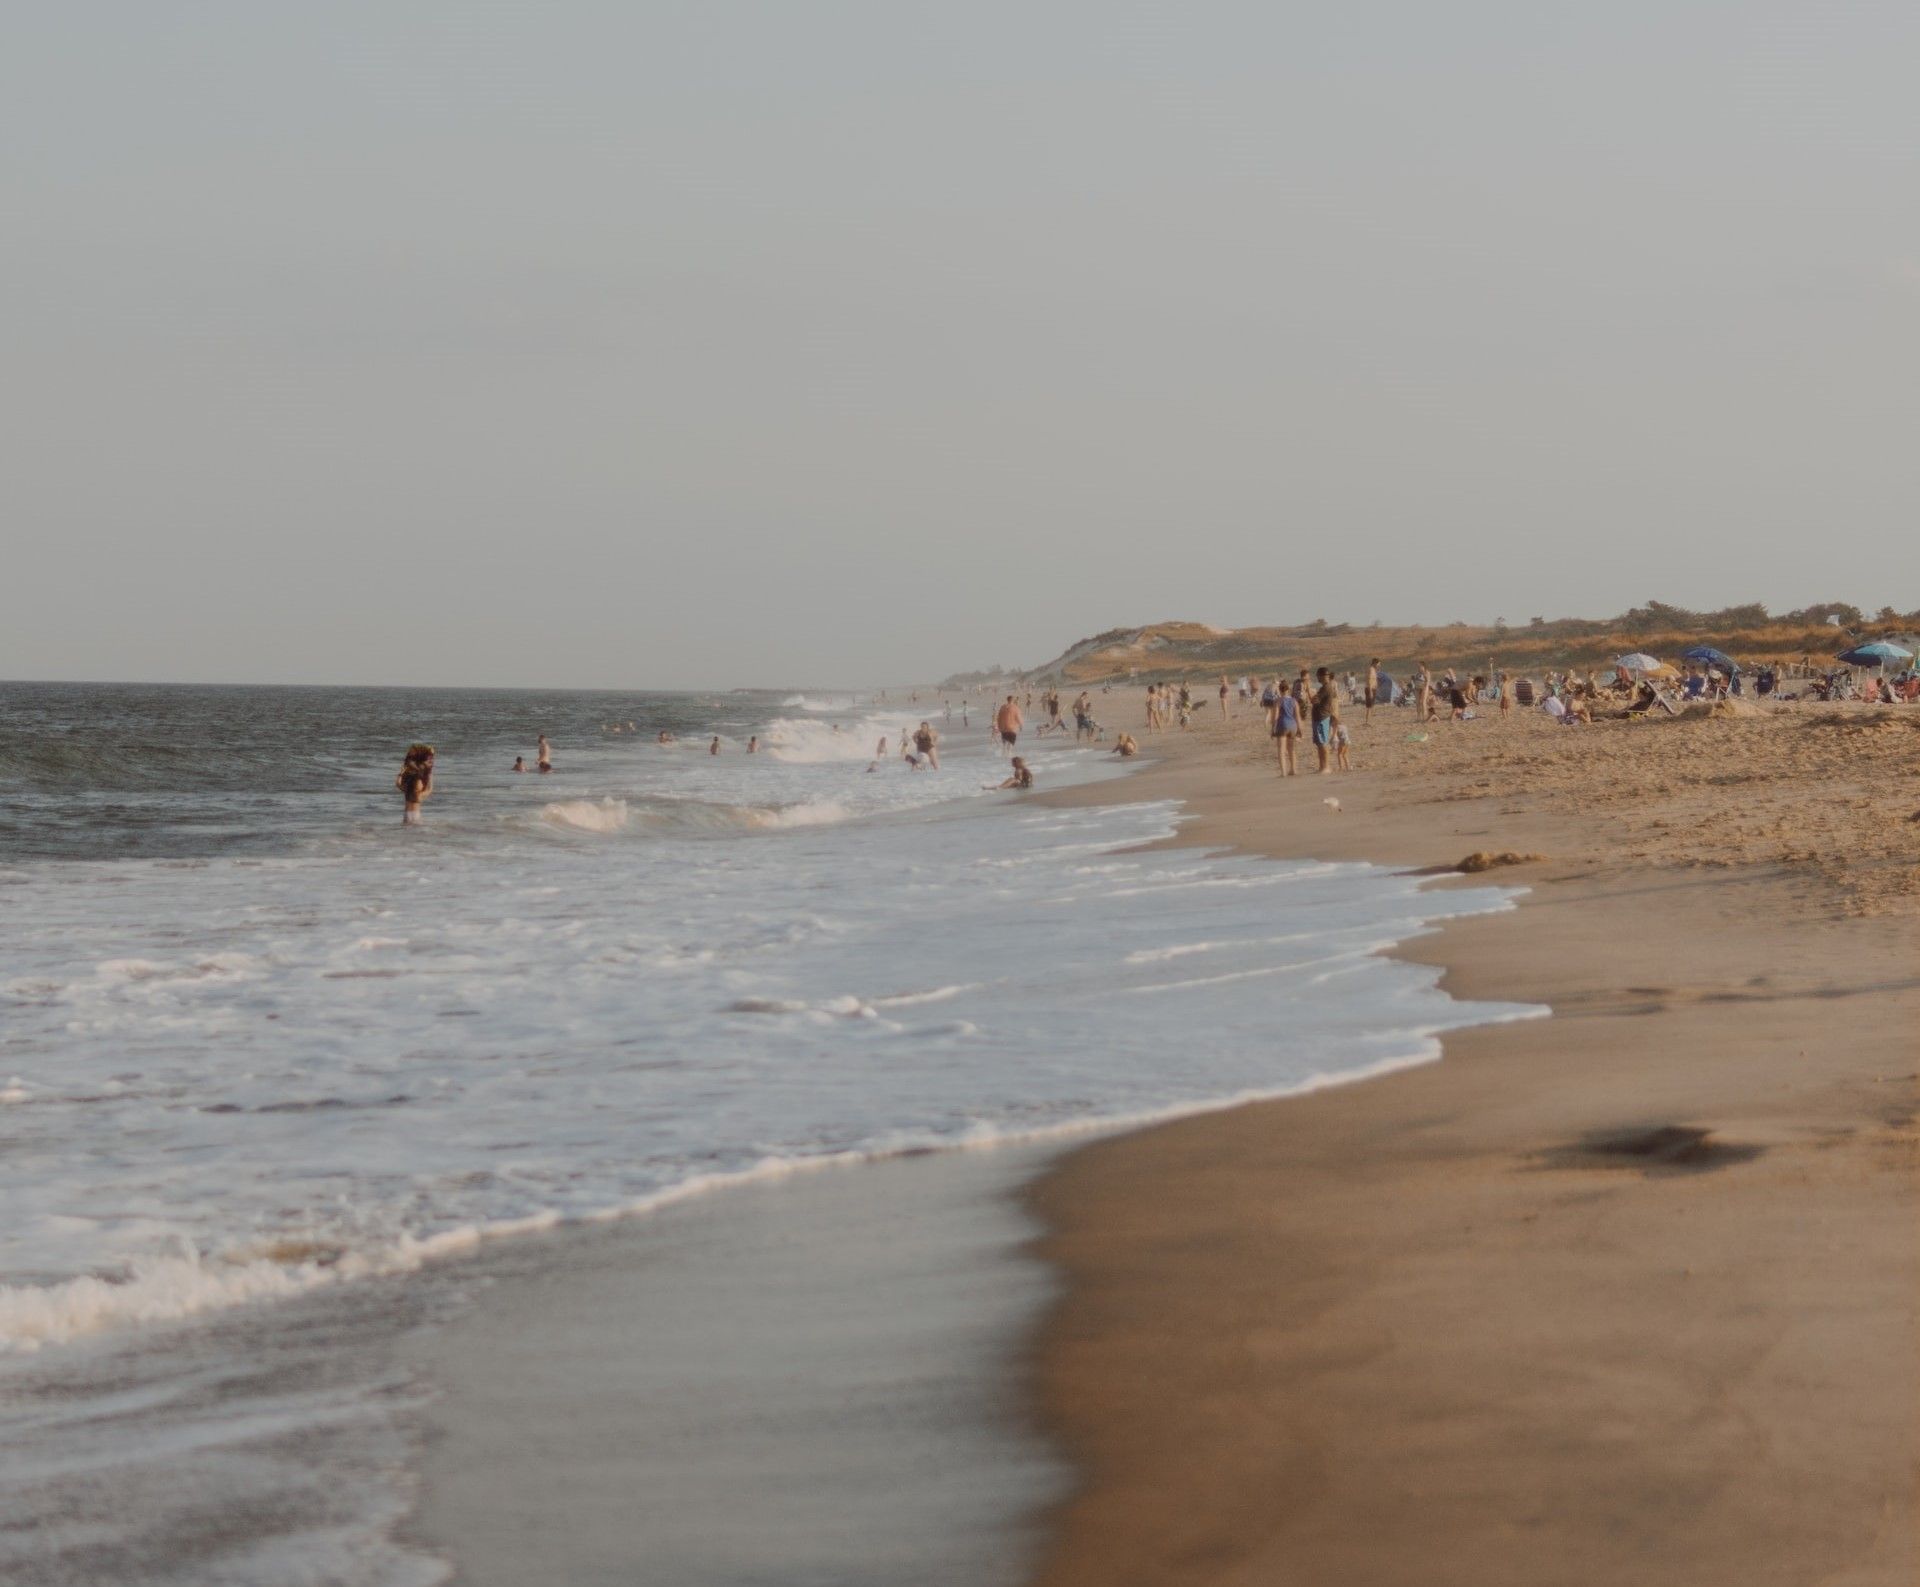 Tourists can spend the day on Rehoboth Beach.